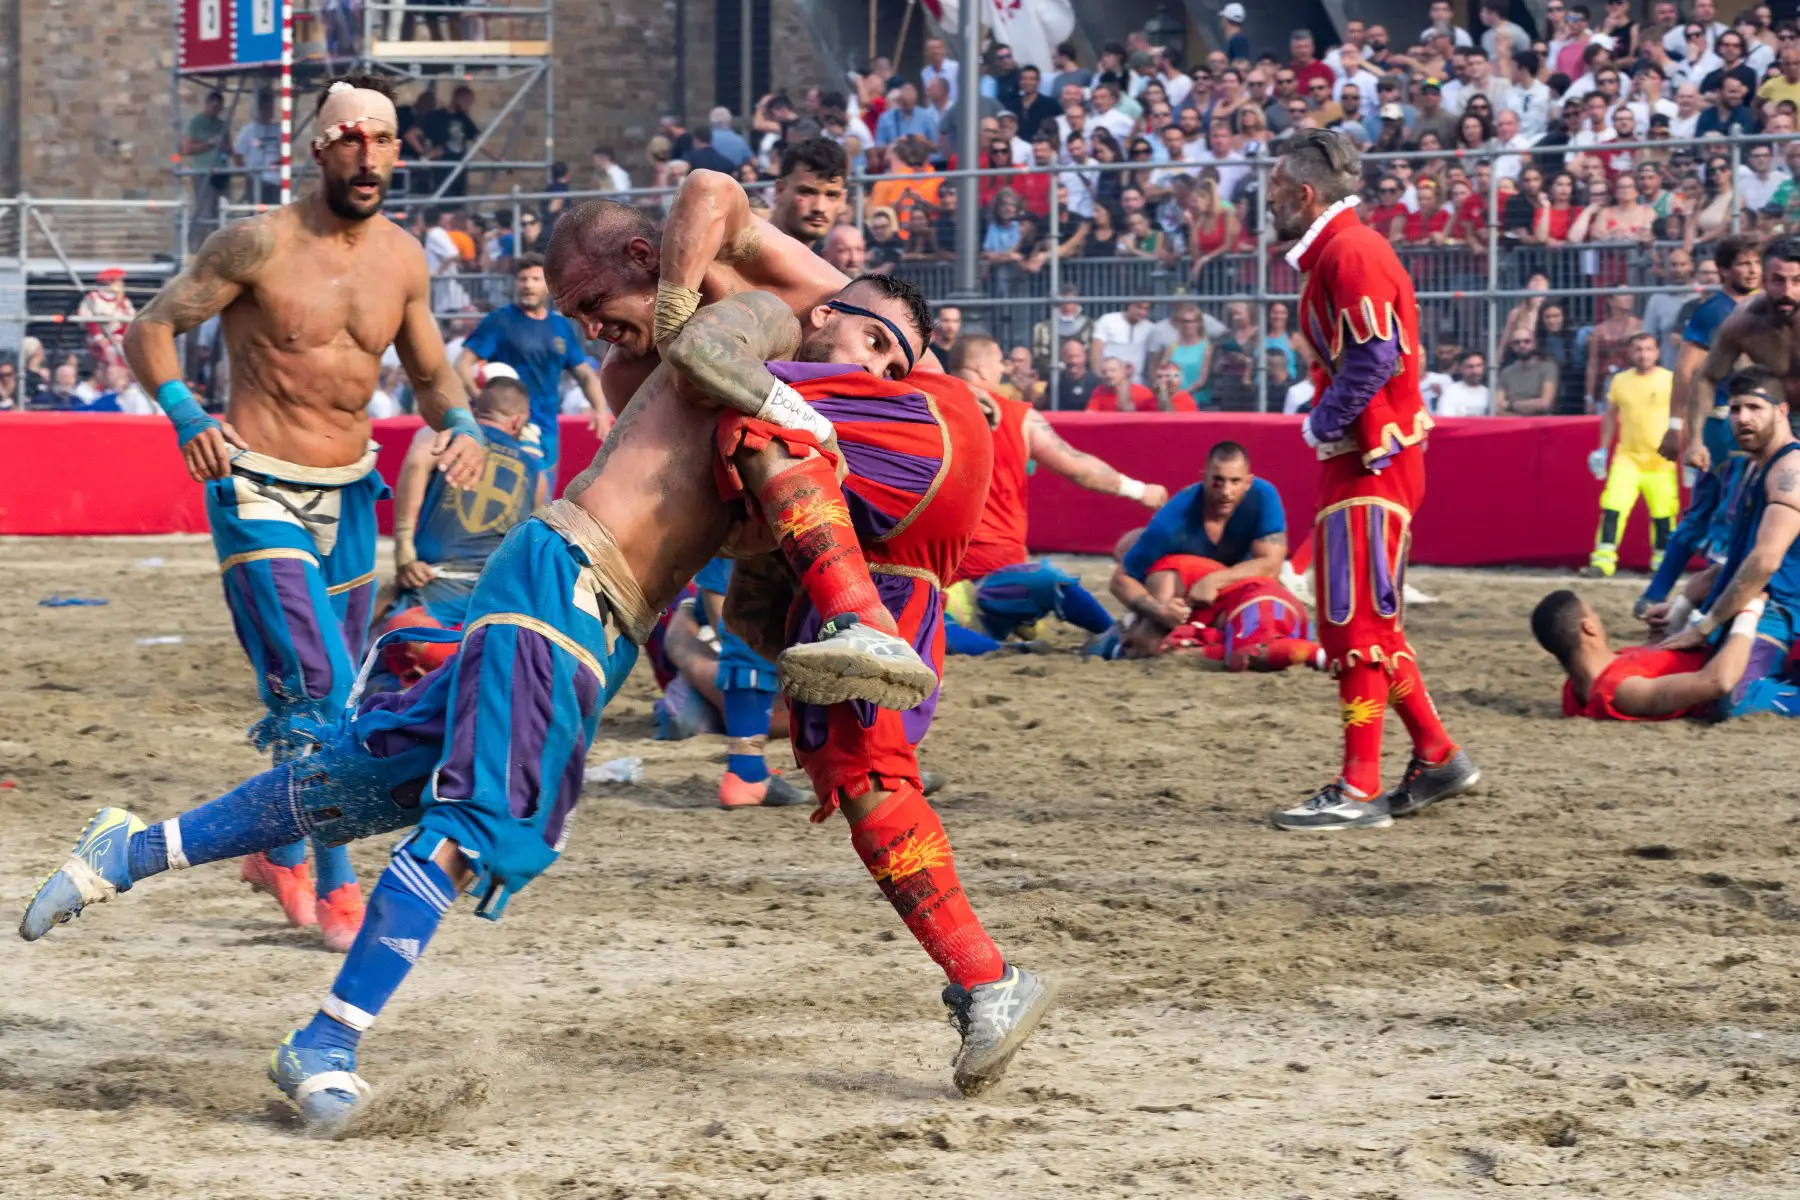 Two opposing teams wrestling during the Calcio Storico in Florence